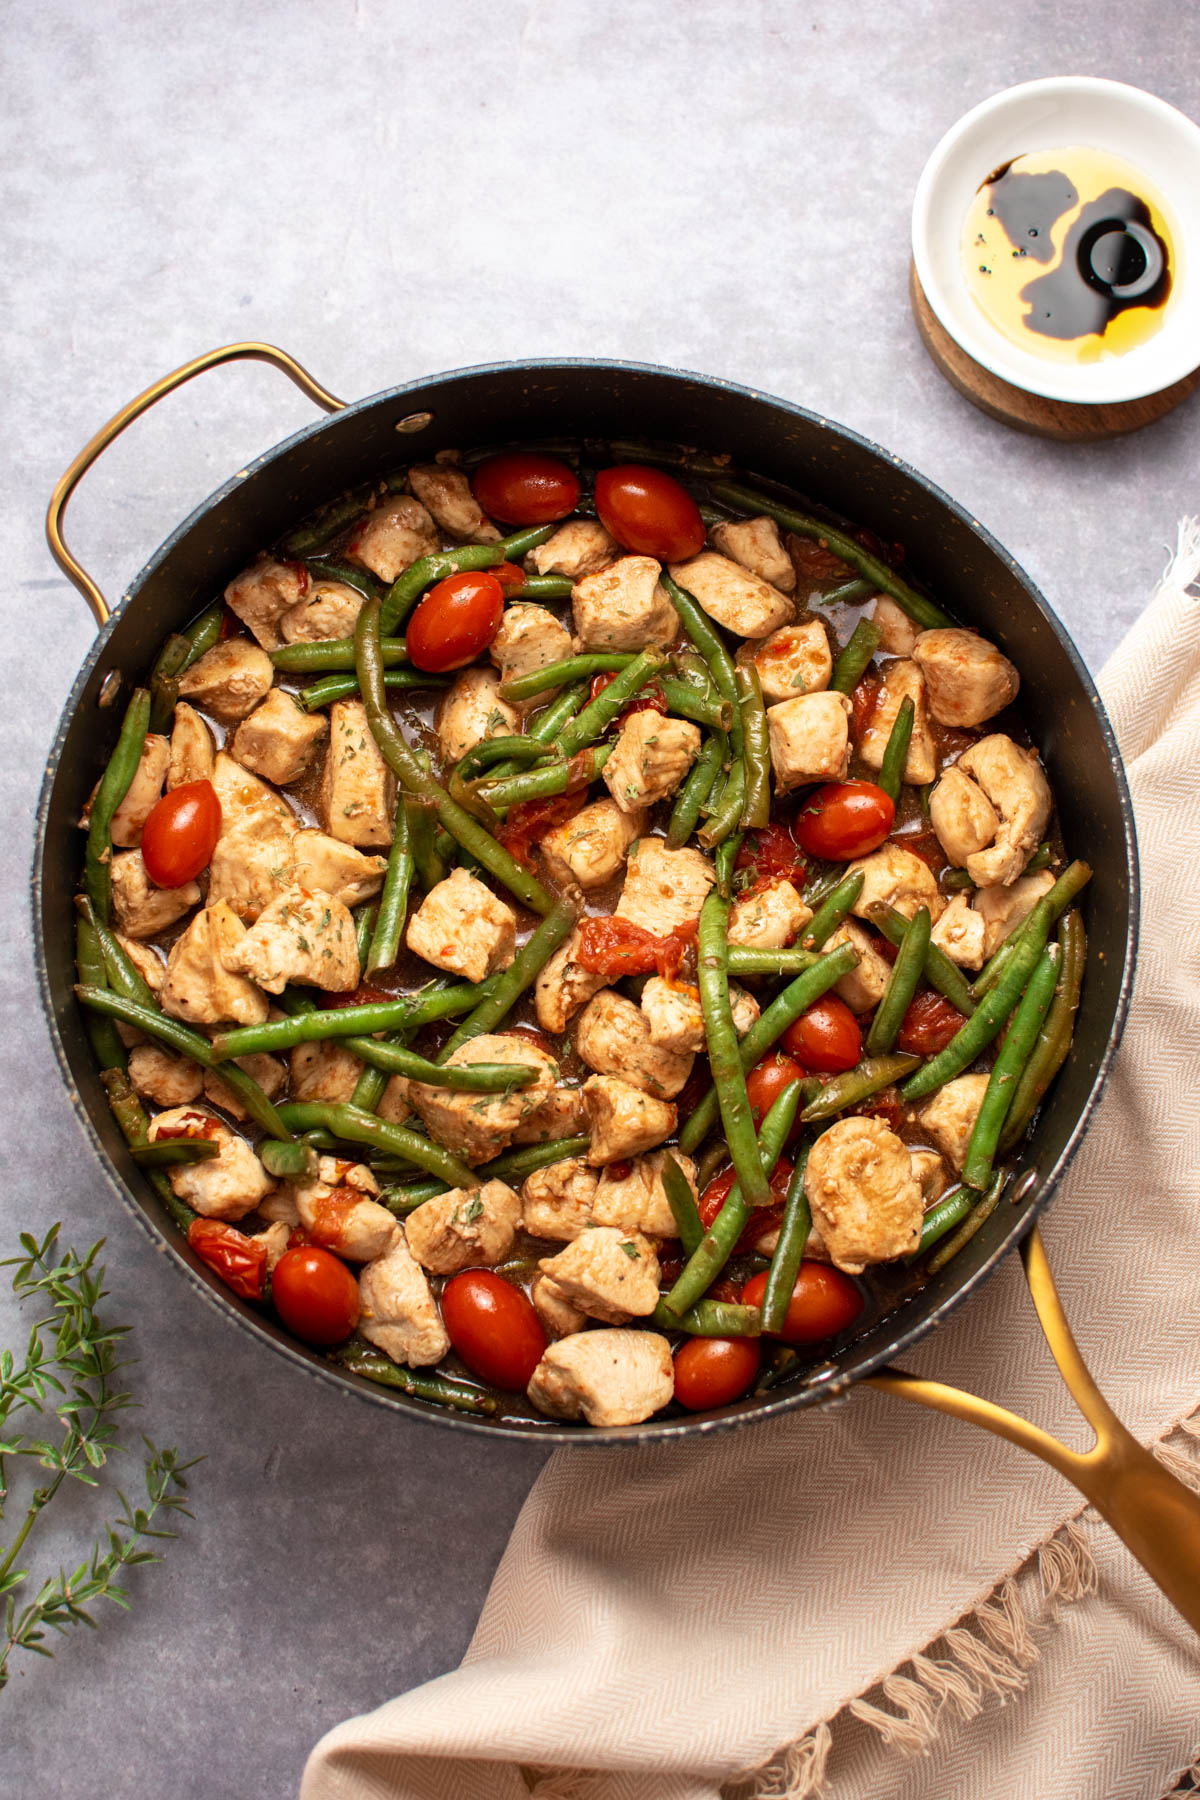 Large black skillet with diced chicken, tomatoes, and green beans on dark table top with tan towel nearby.